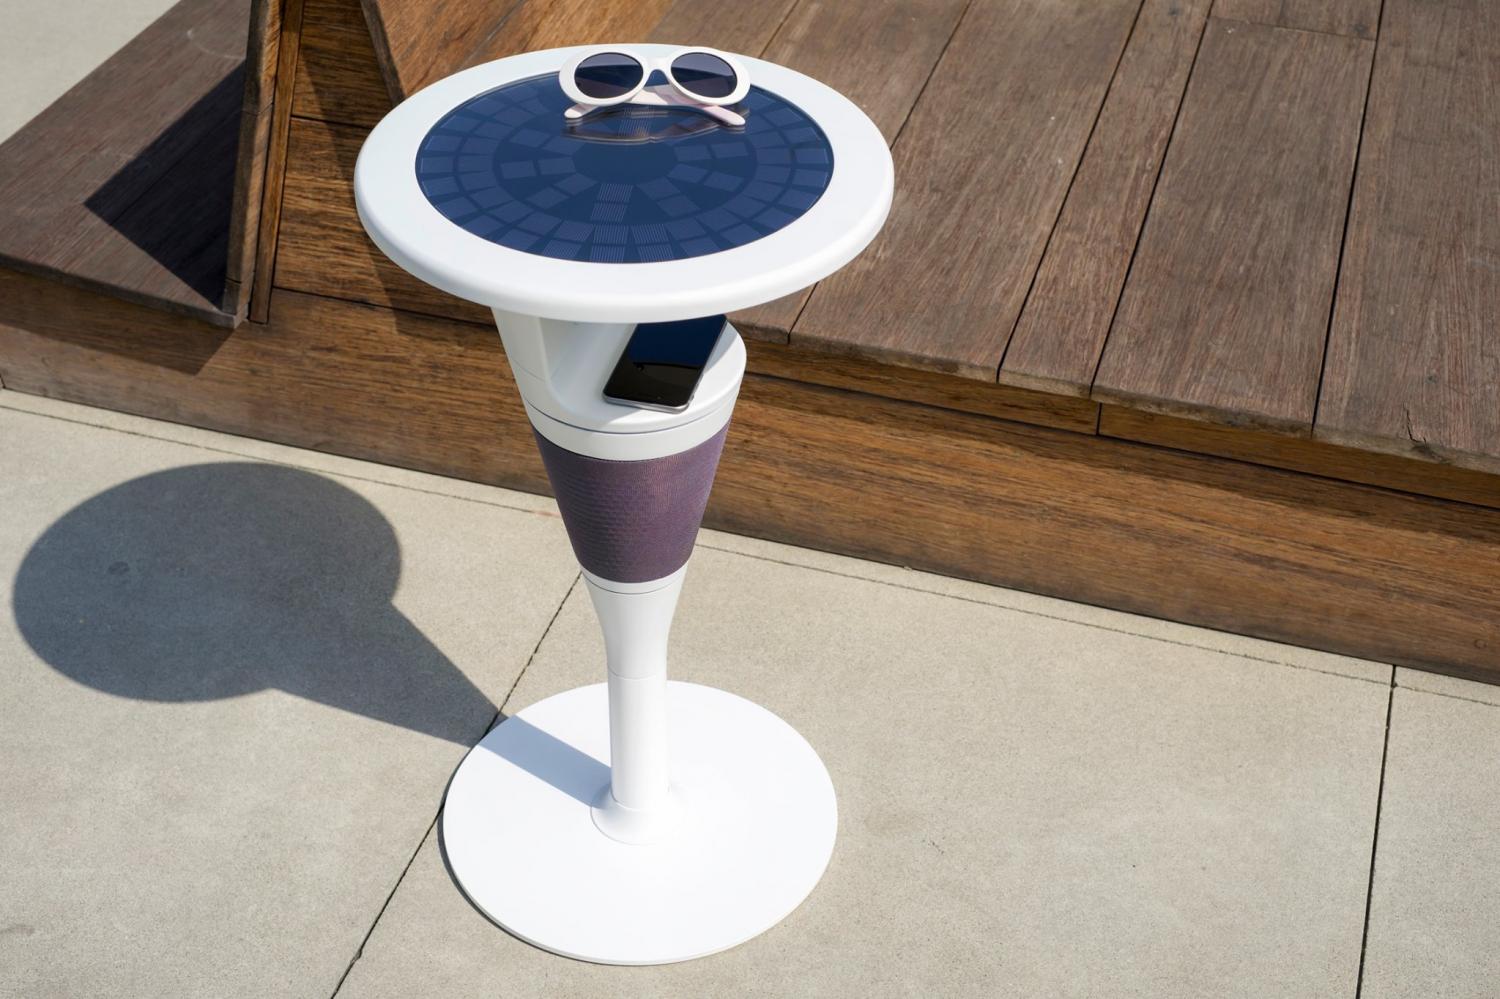 SunTable Is a 3-in-1 Solar Powered Table With an Integrated Speaker and Wireless Charger - Solar powered poolside table